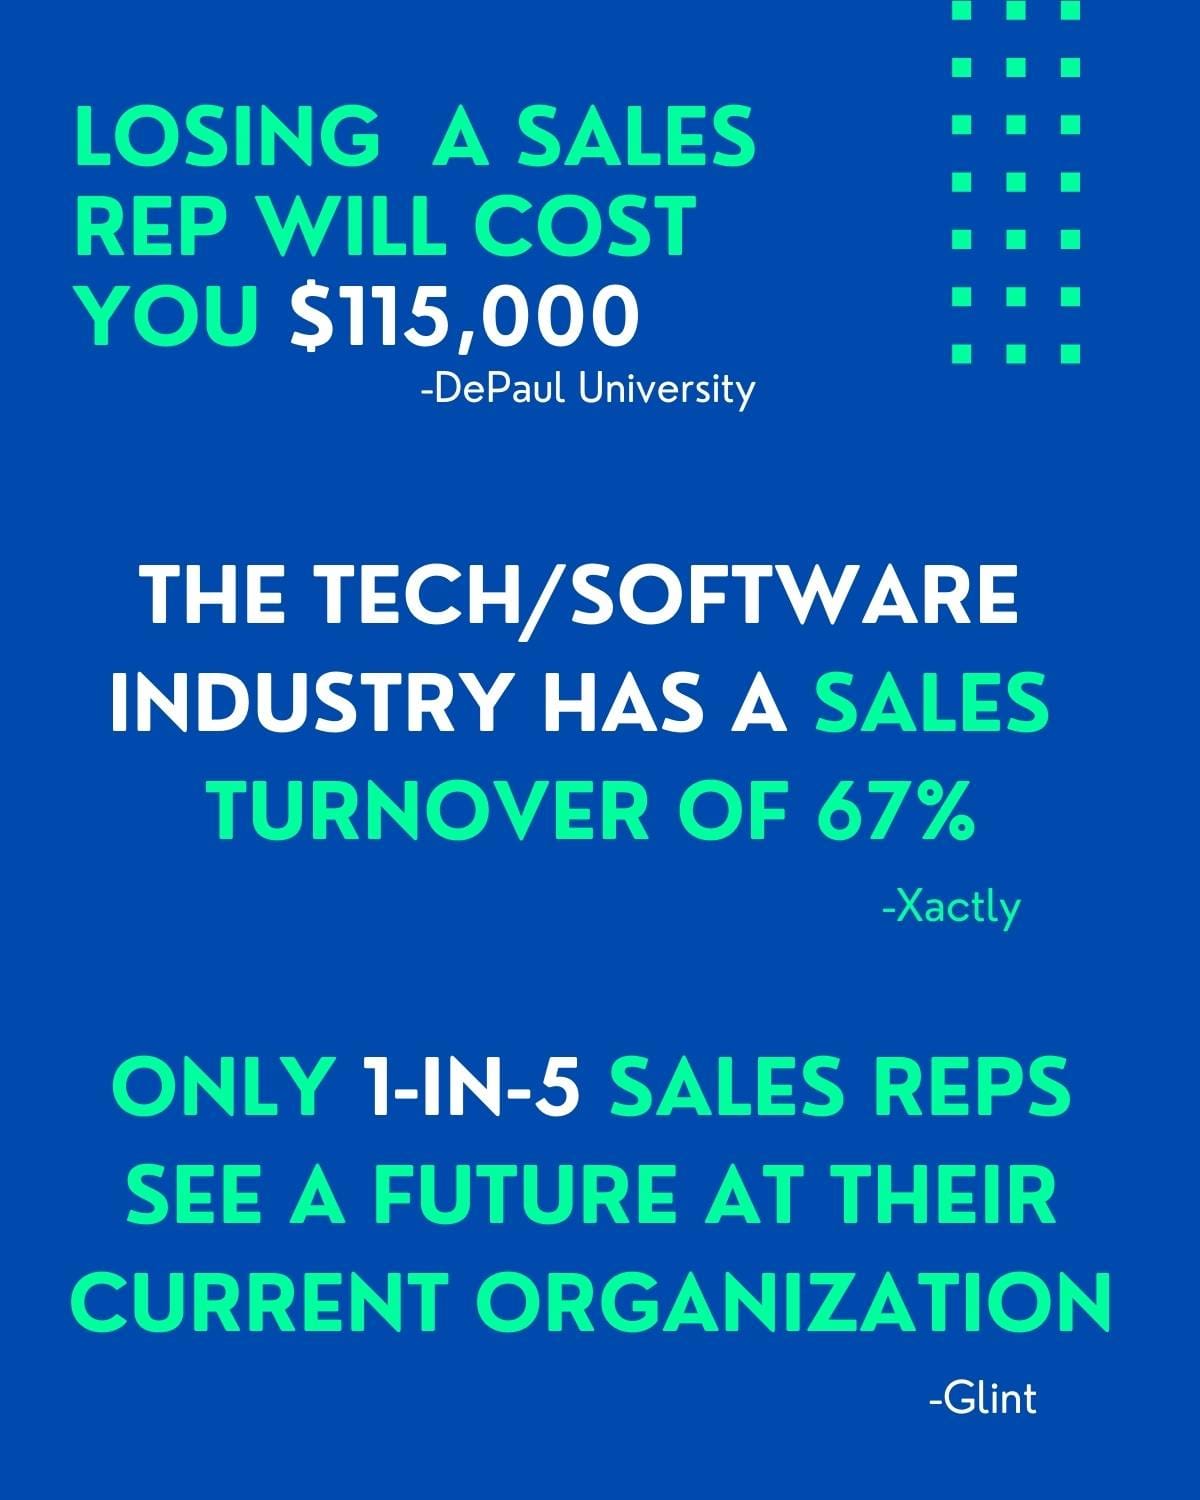 A graphic with 3 stats- 1) Losing a sales rep will cost you 115k 2) the tech/software industry has a sales turnover of 67% 3) 1-in-5 reps see a future at their current org.